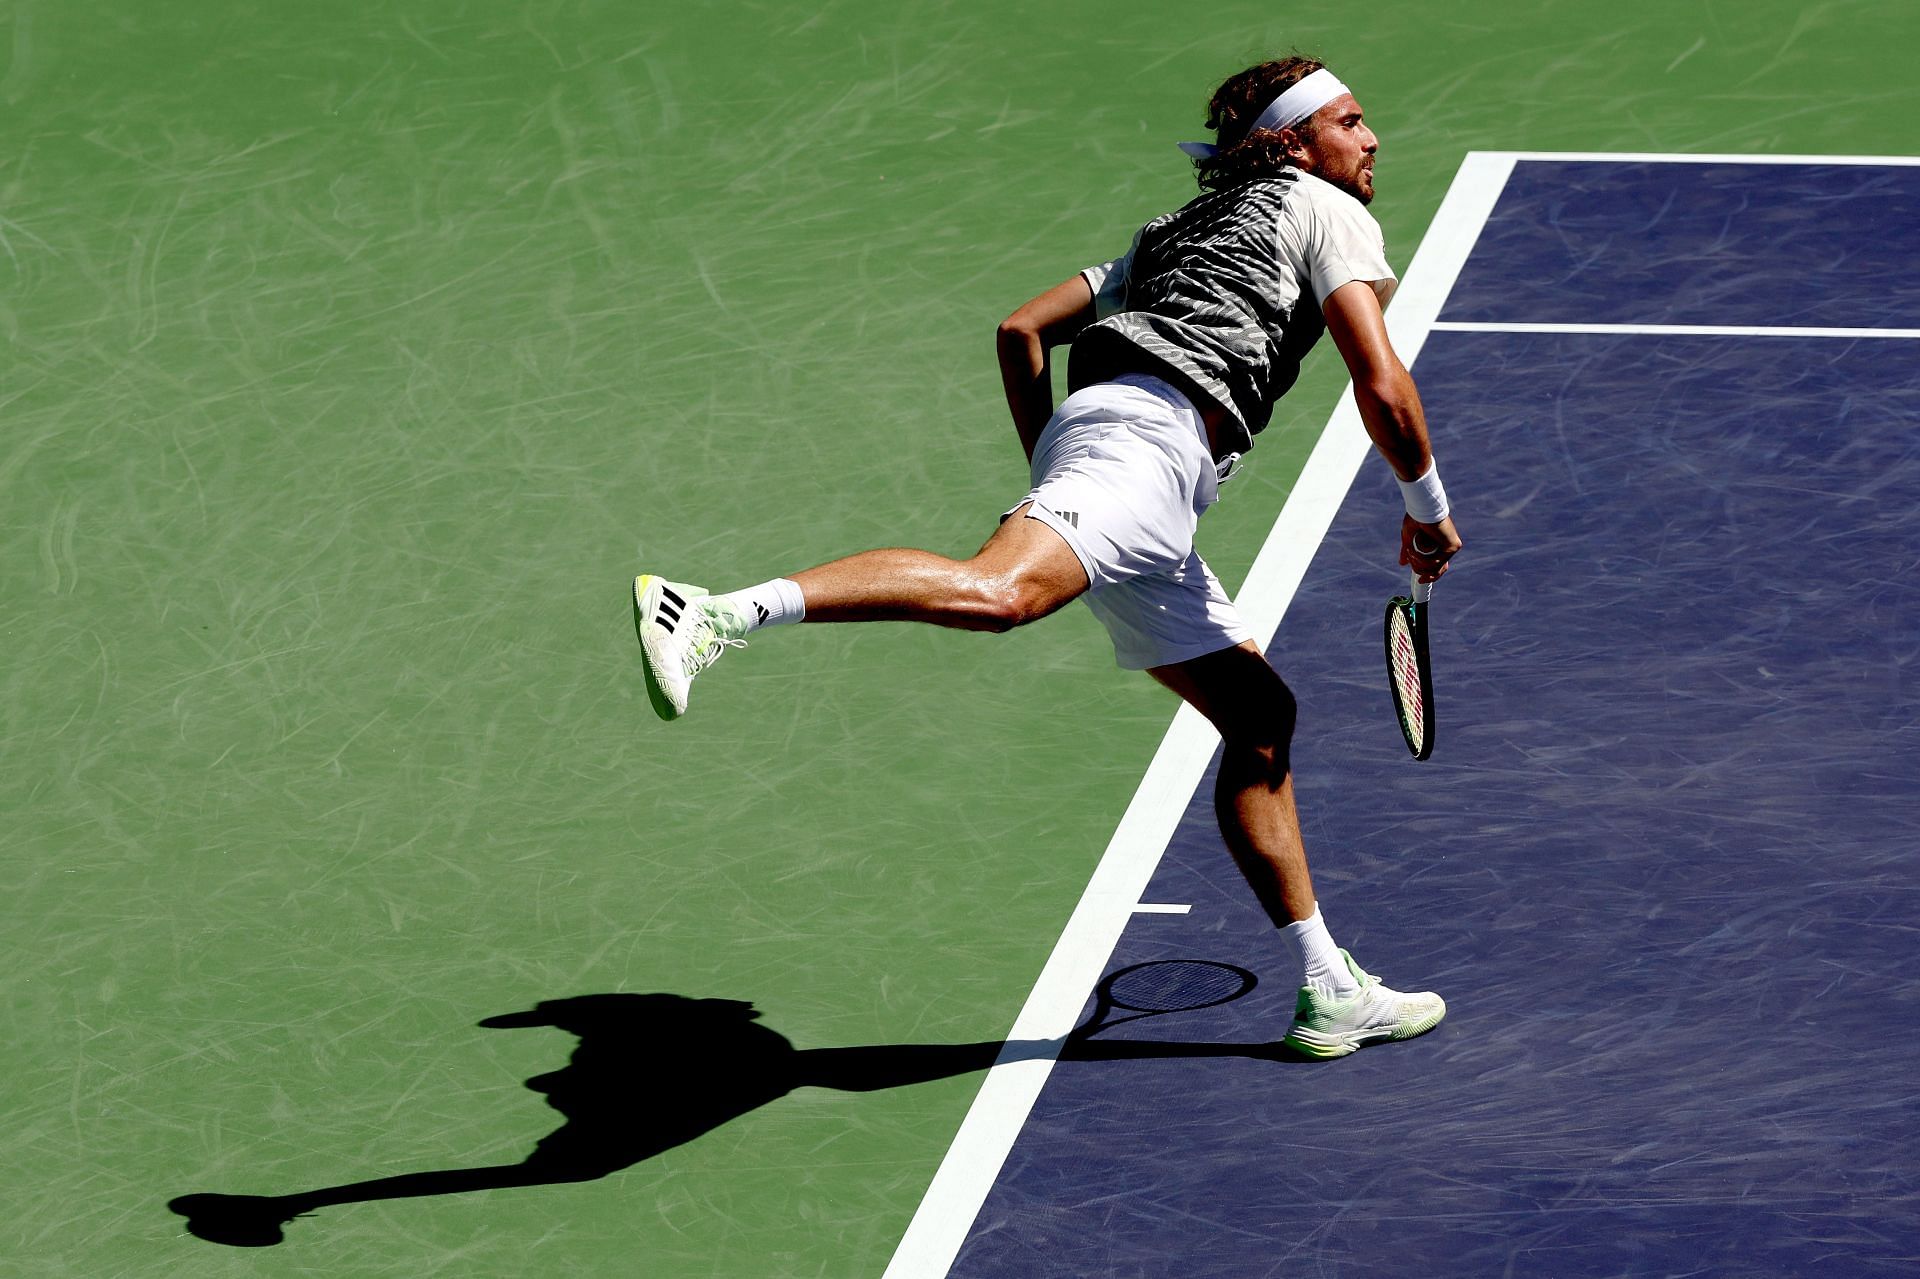 The Greek in action at the BNP Paribas Open in Indian Wells